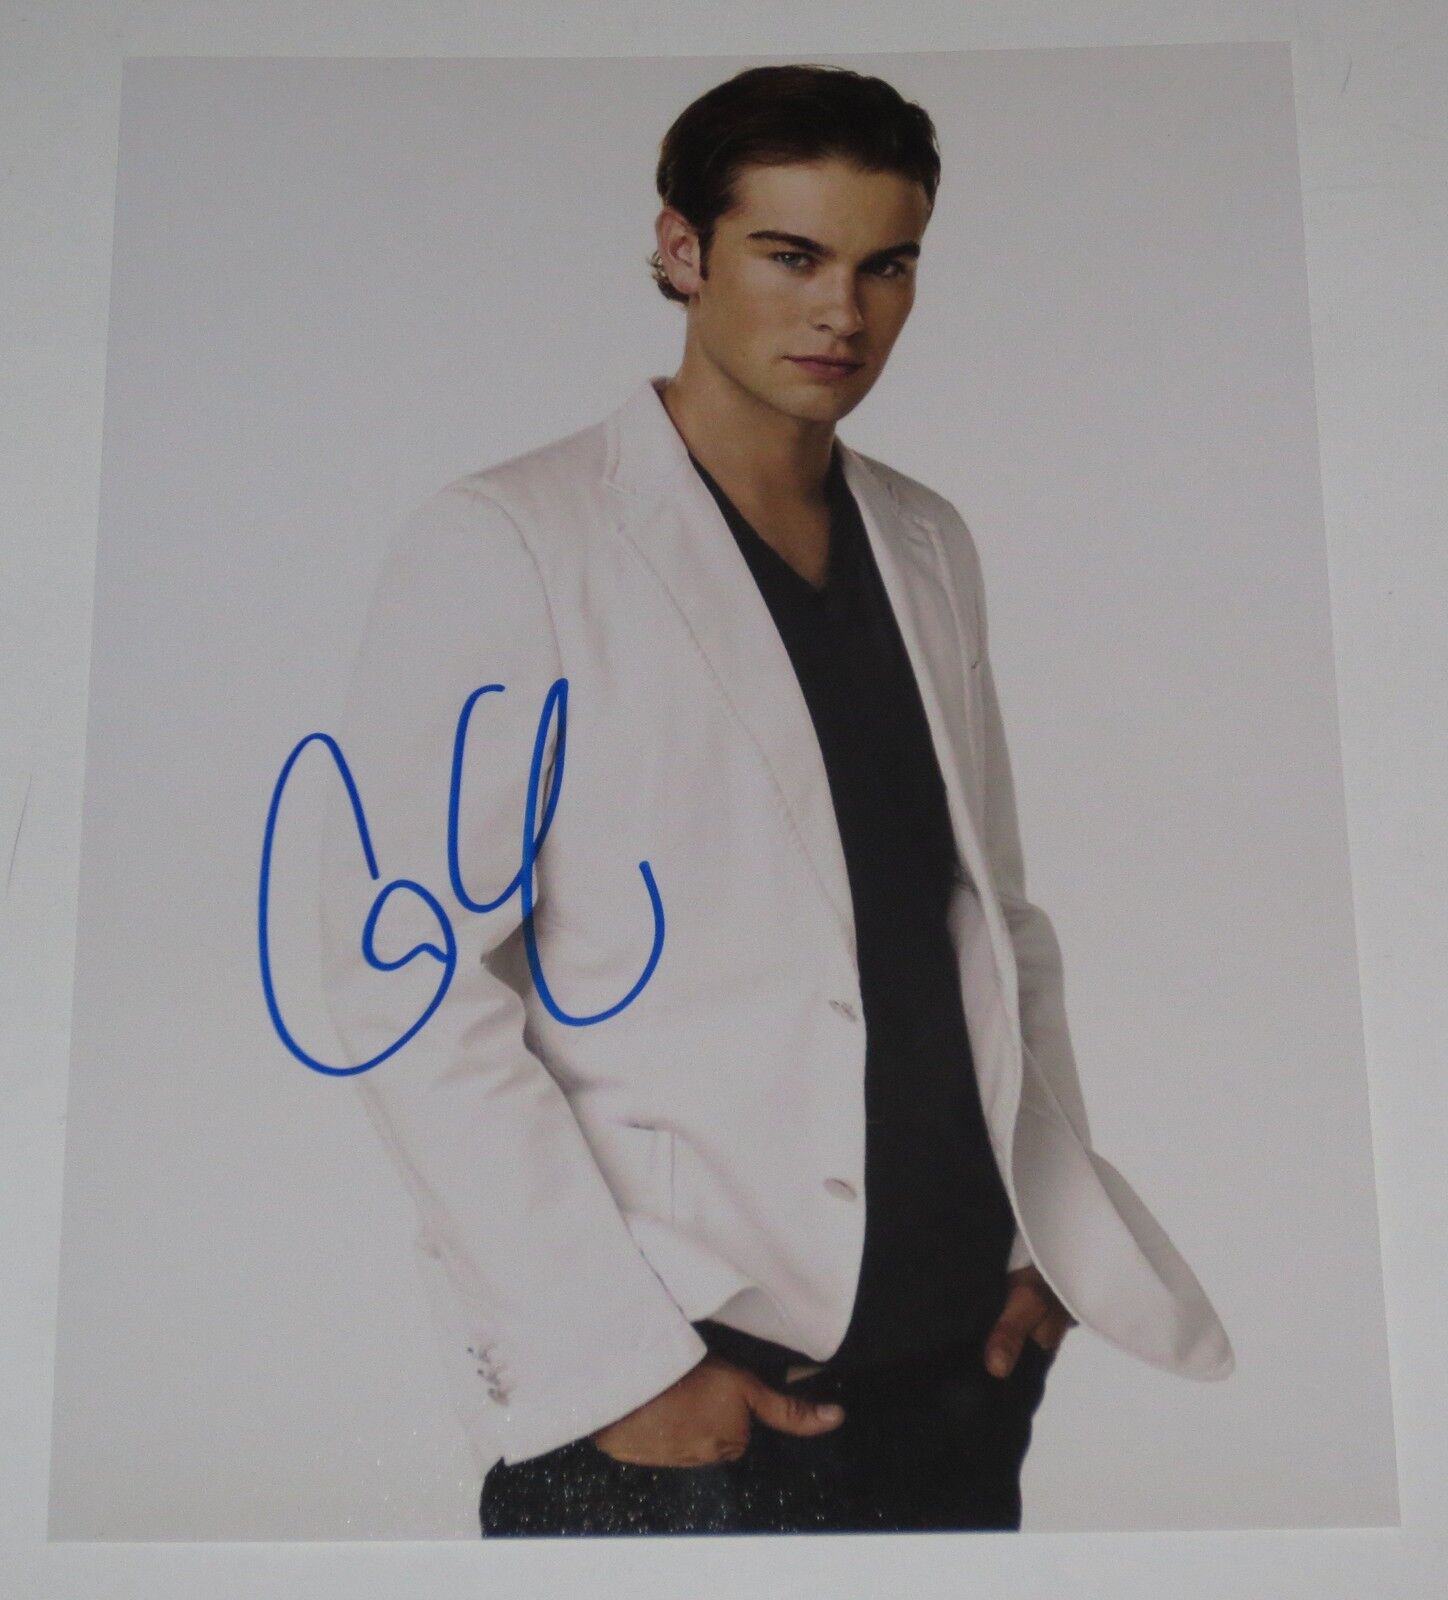 GOSSIP GIRL CHACE CRAWFORD SIGNED 8X10 PHOTO AUTOGRAPH SEXY NATE ARCHIBALD COA B